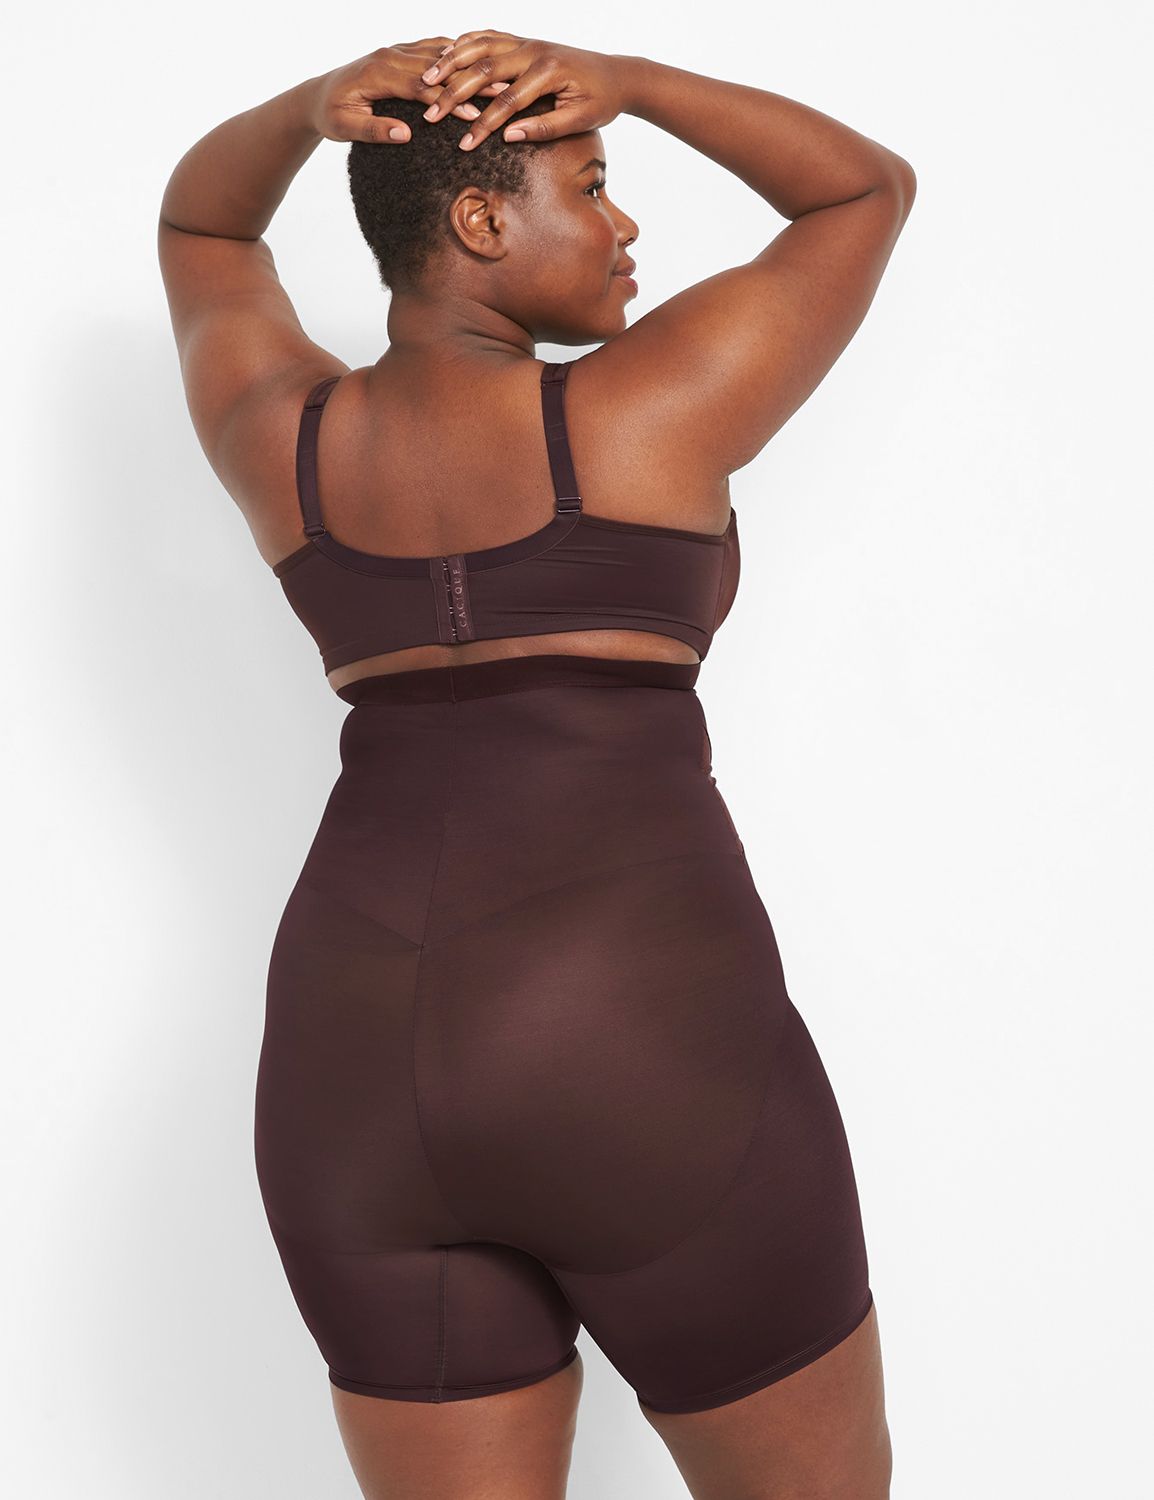 Second thoughts - will shapewear solve my problems? : r/weddingdress